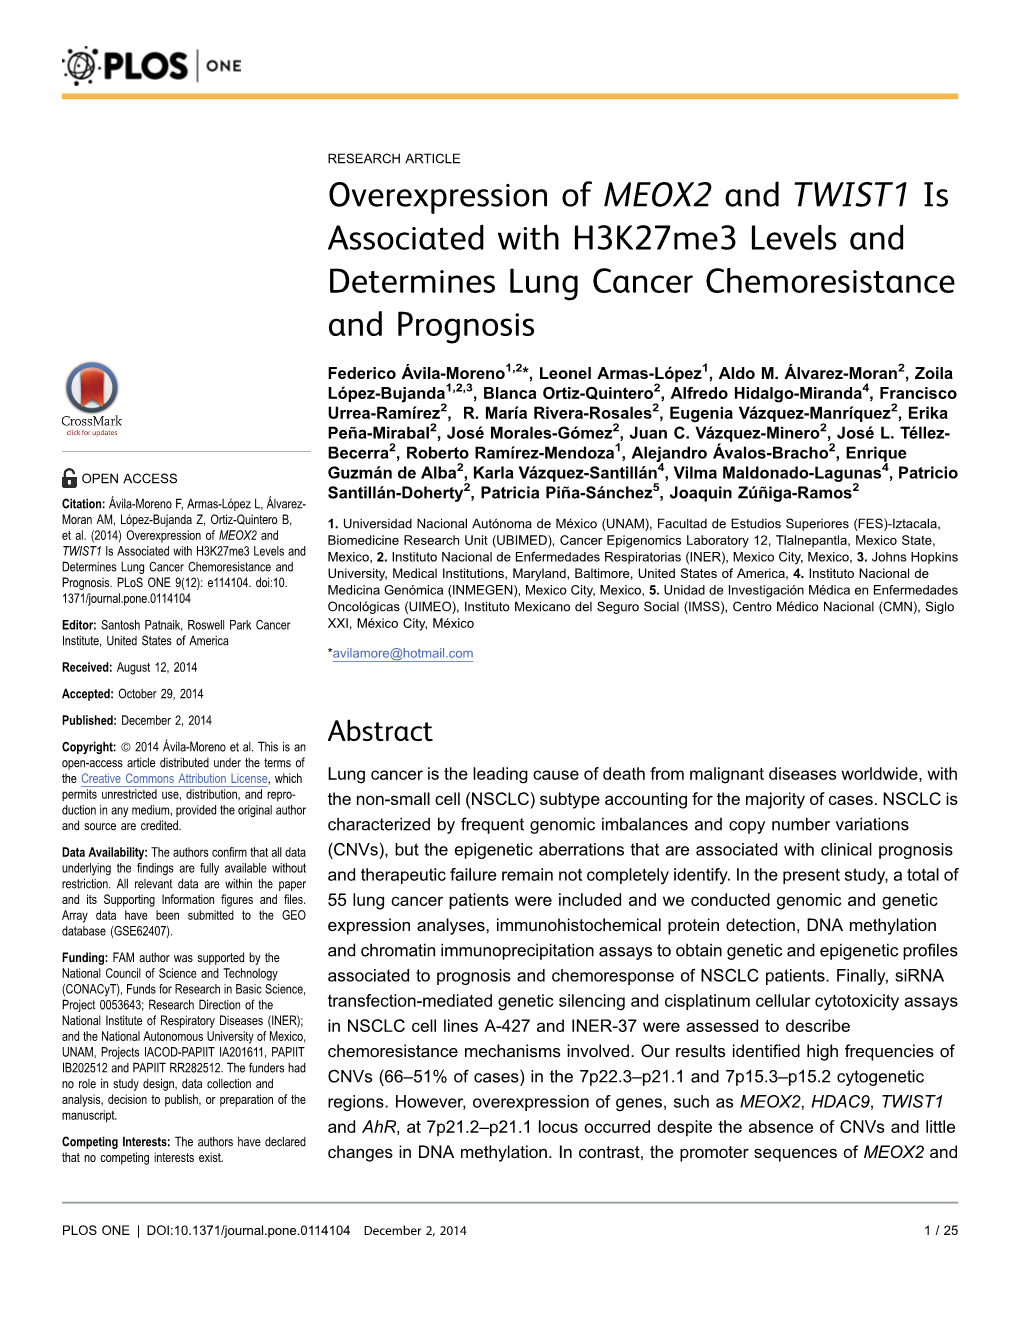 Overexpression of MEOX2 and TWIST1 Is Associated with H3k27me3 Levels and Determines Lung Cancer Chemoresistance and Prognosis